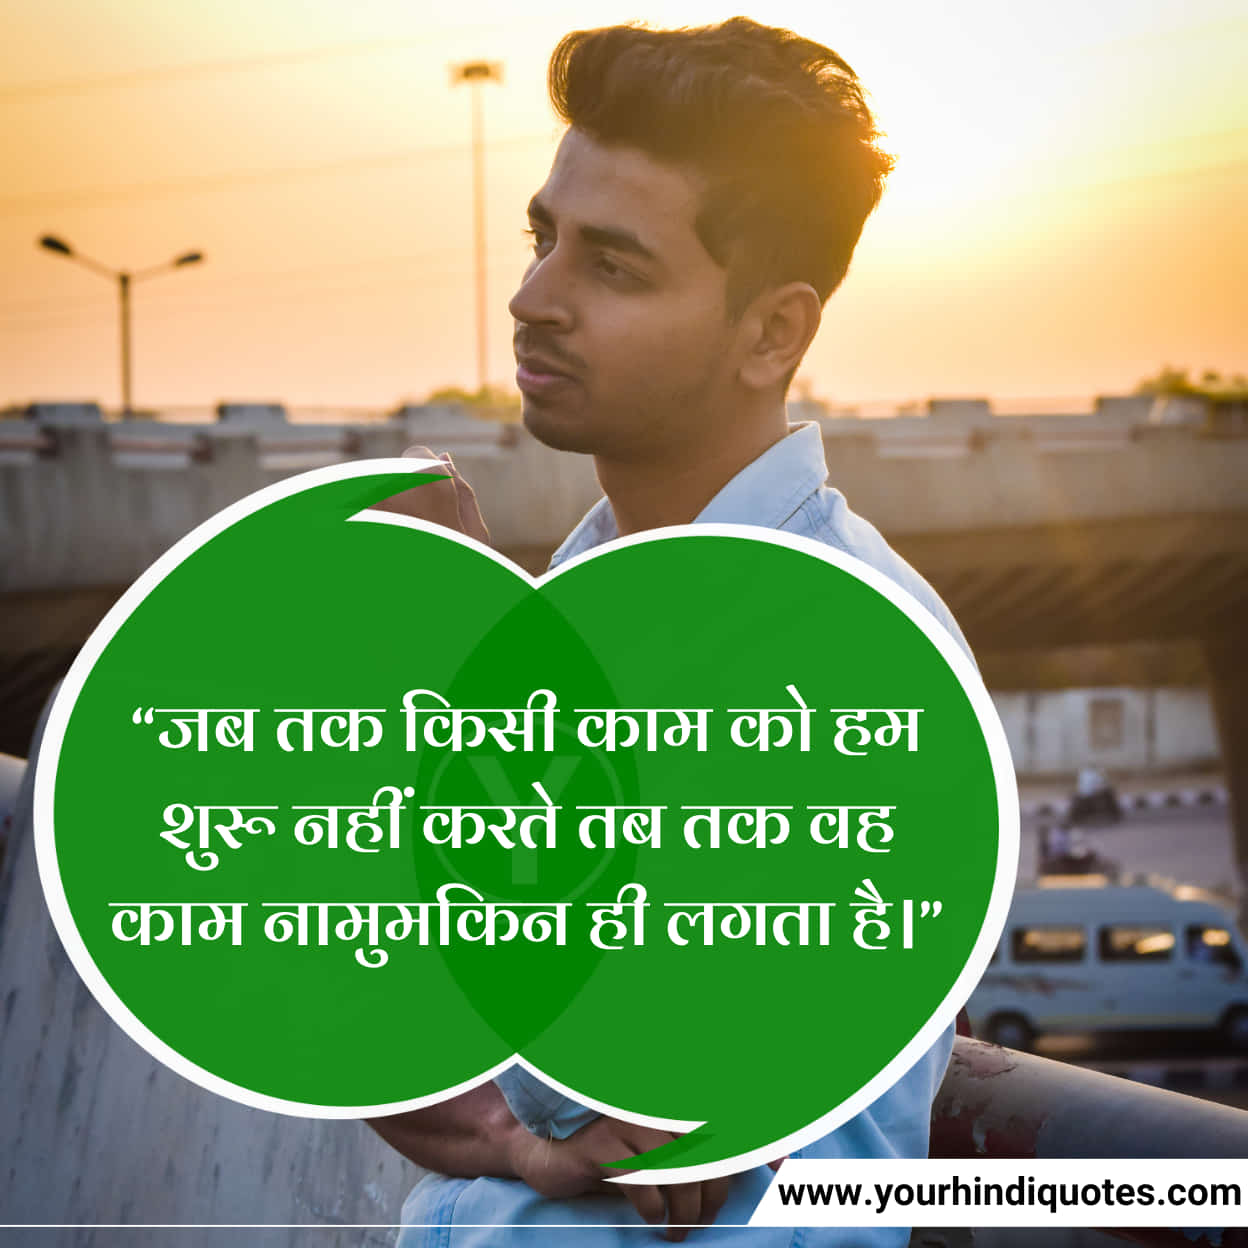 Quotes In Hindi